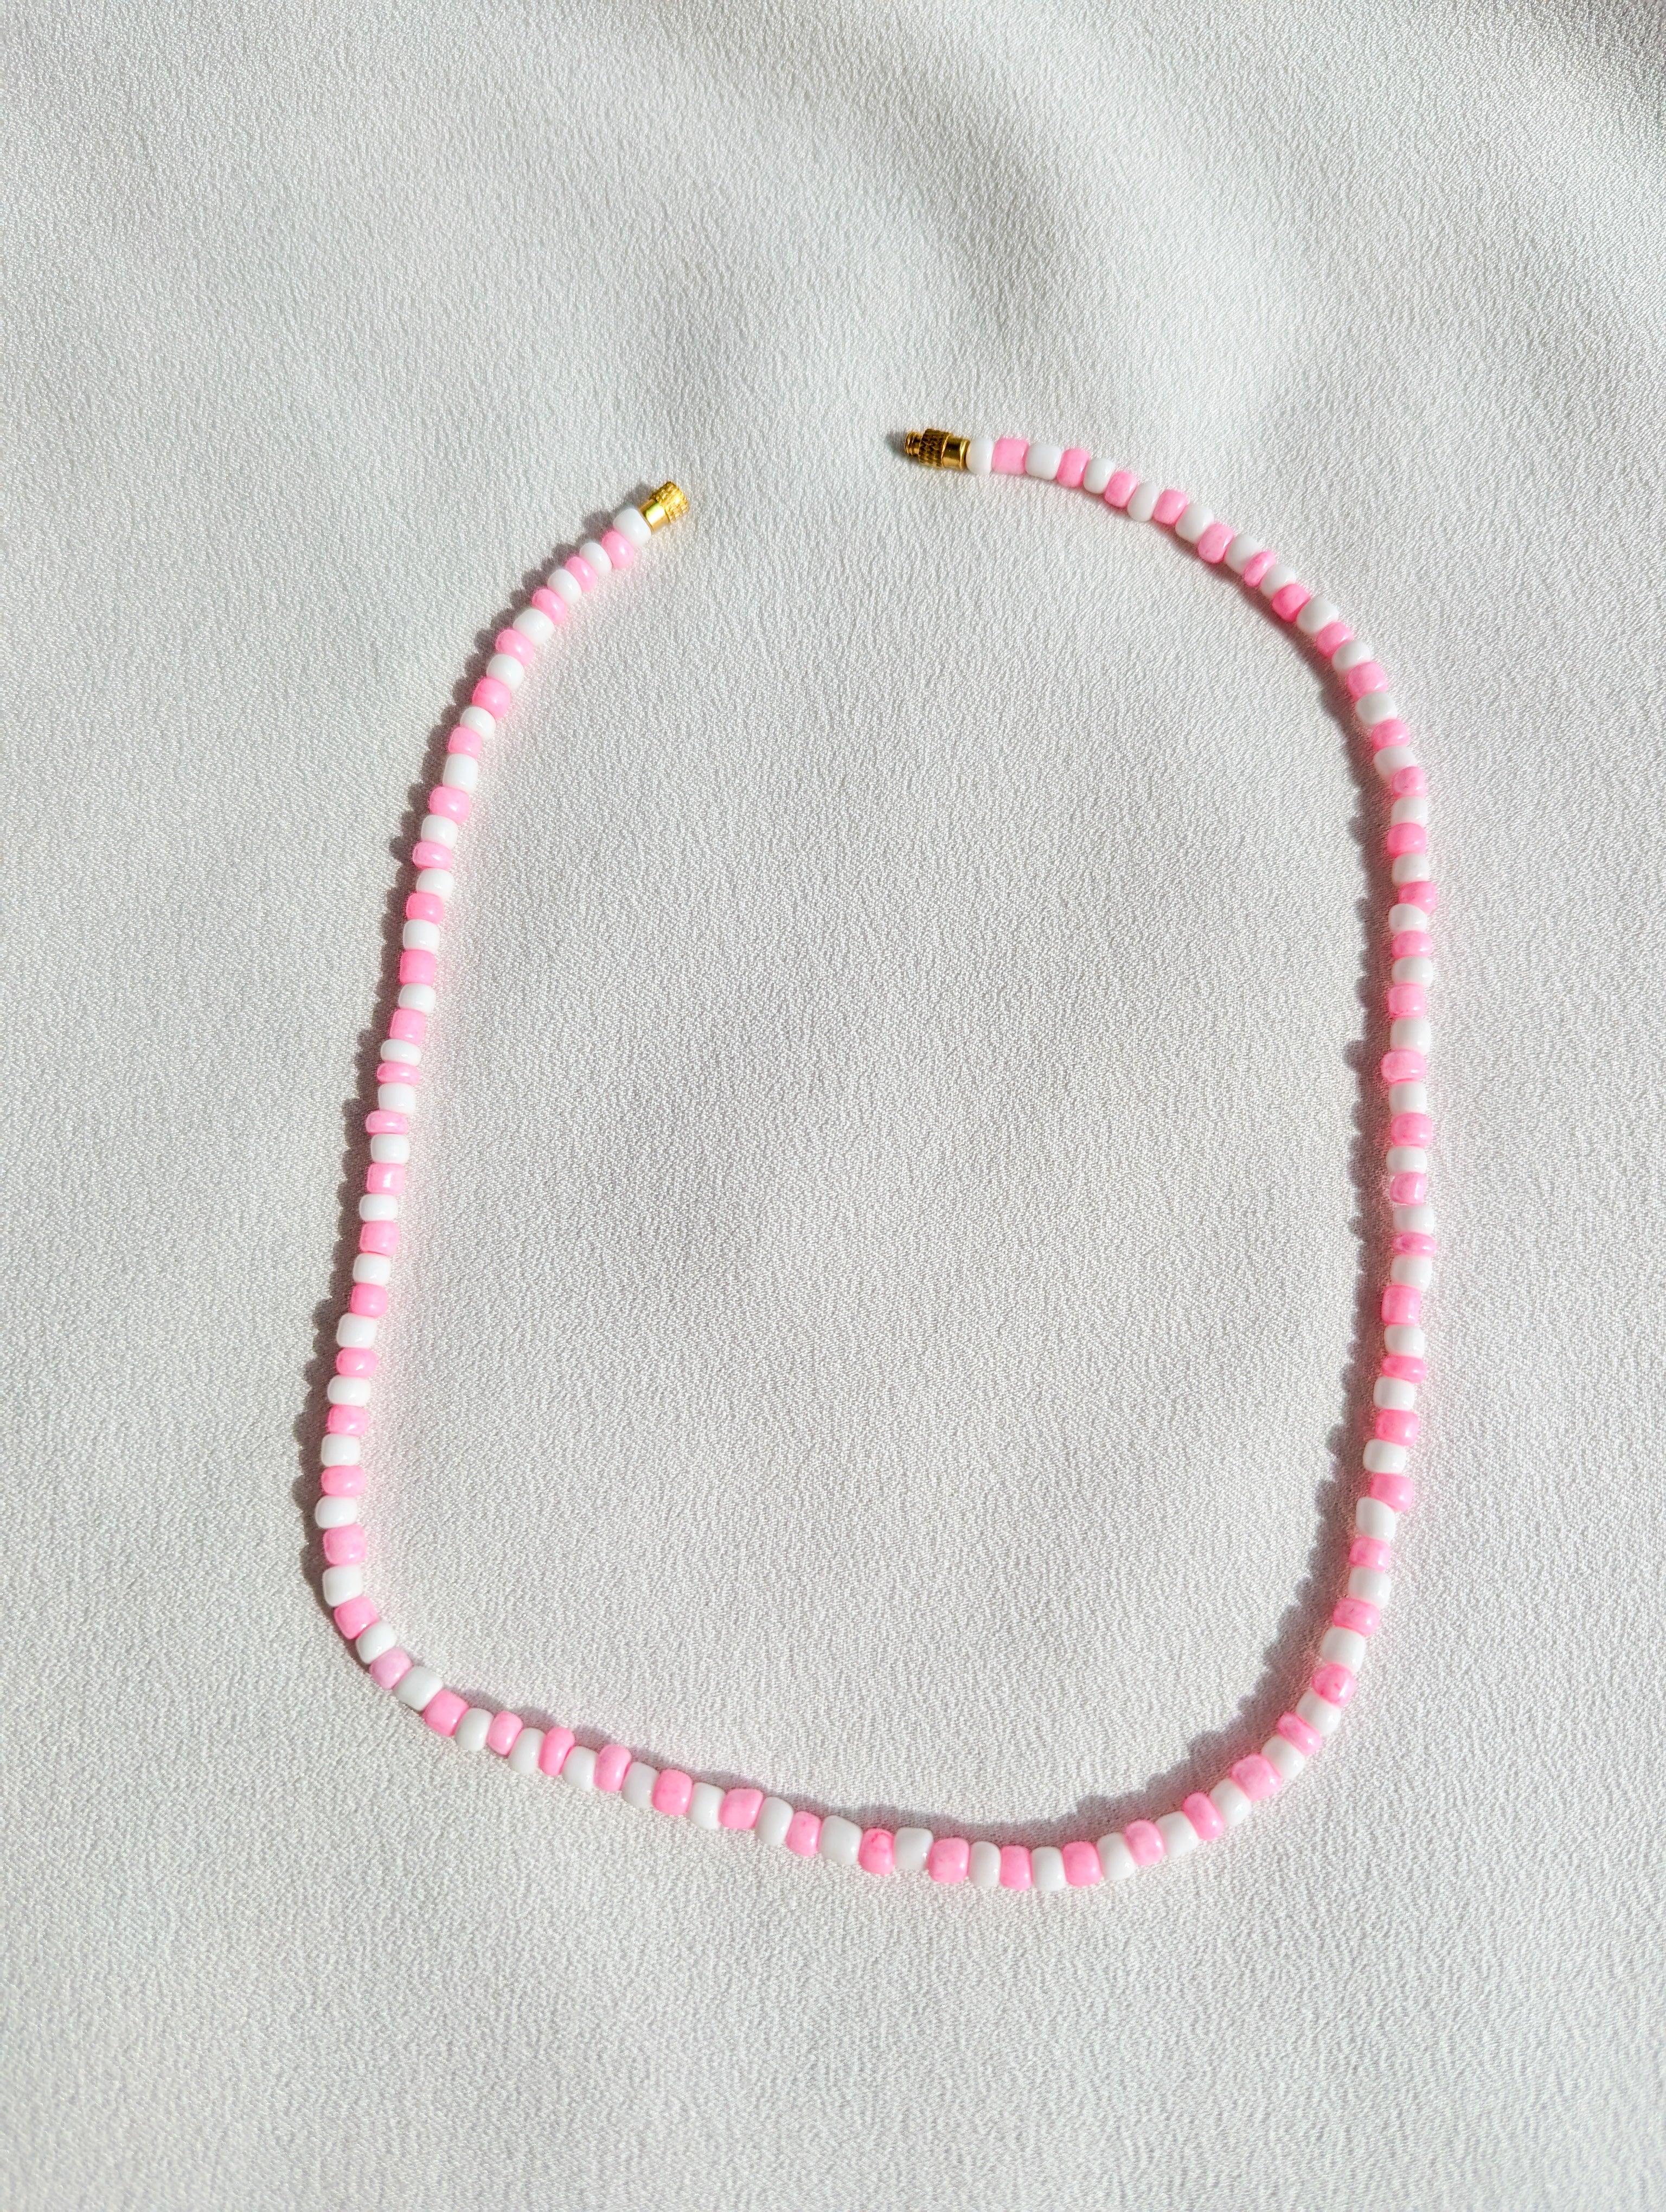 [THE TWO] Necklace: Pink/White [Small Beads]